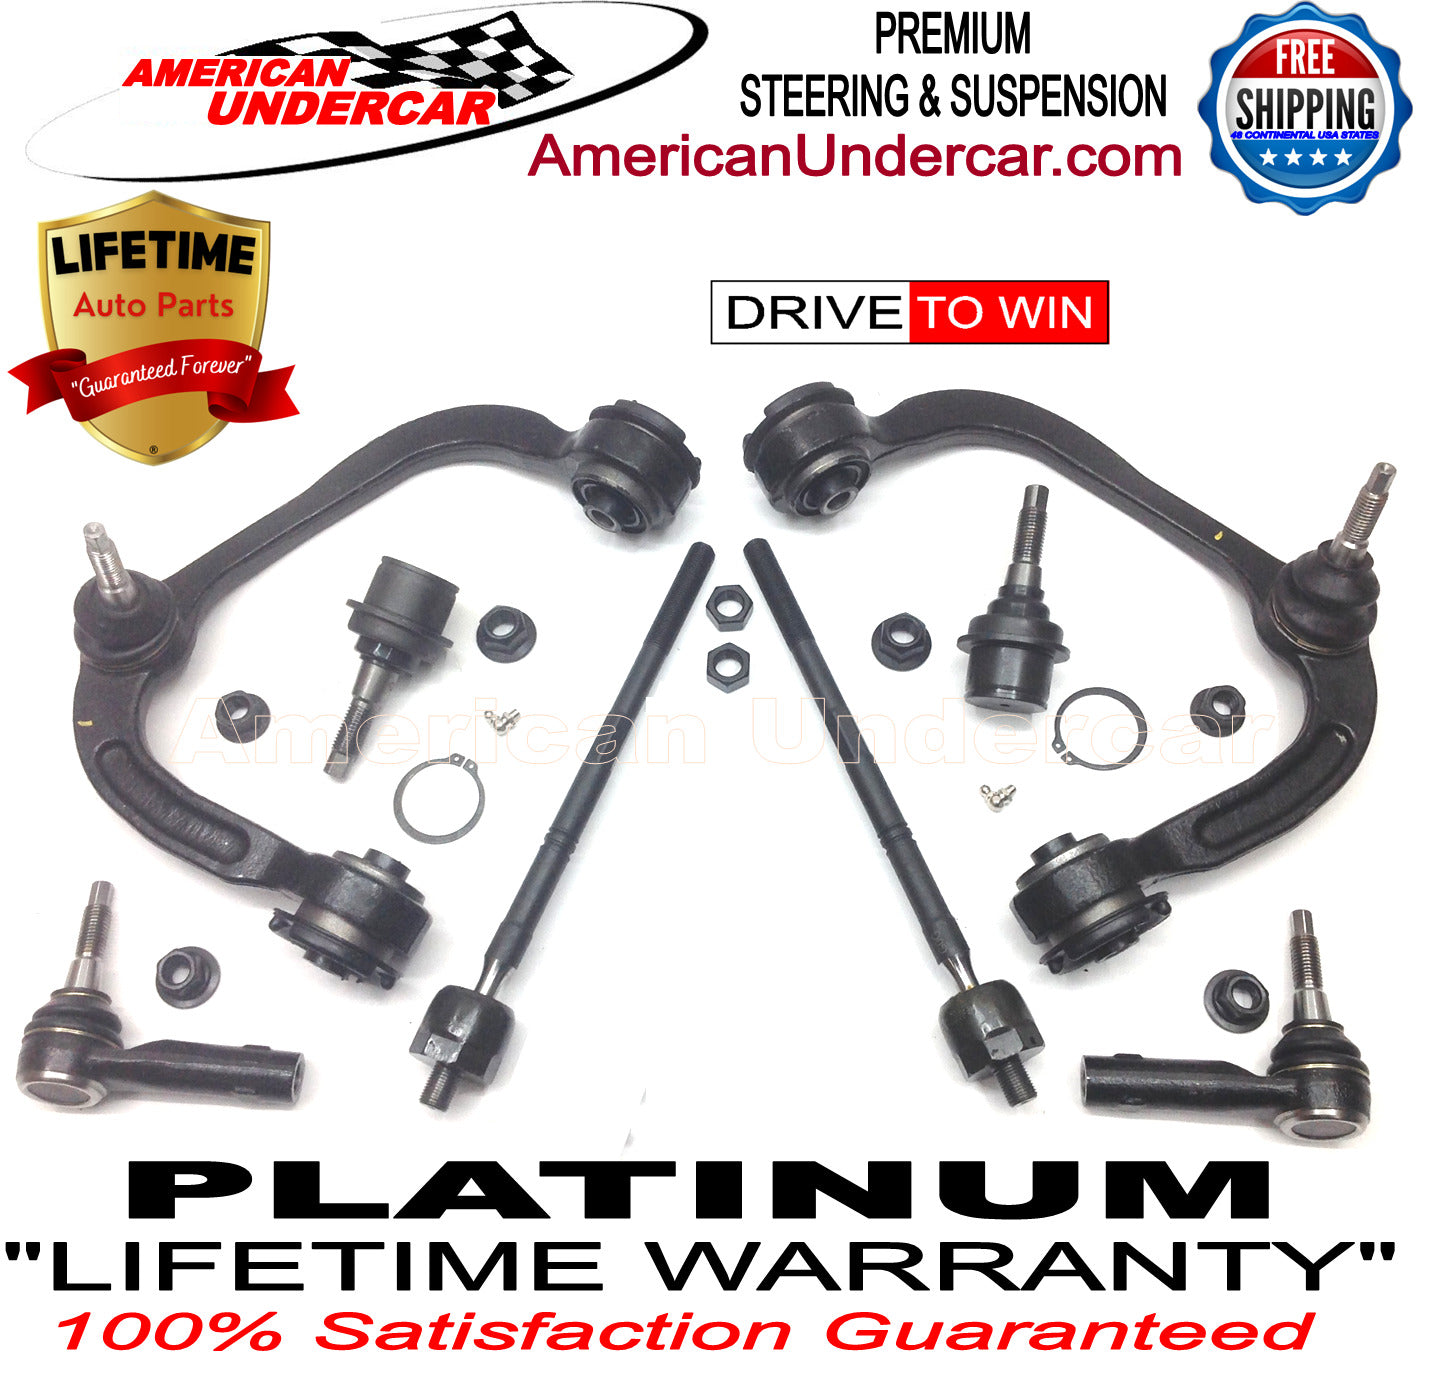 Lifetime Ball Joints Control Arms Tie Rod Steering Kit for 2009-2014 Ford F150 2WD